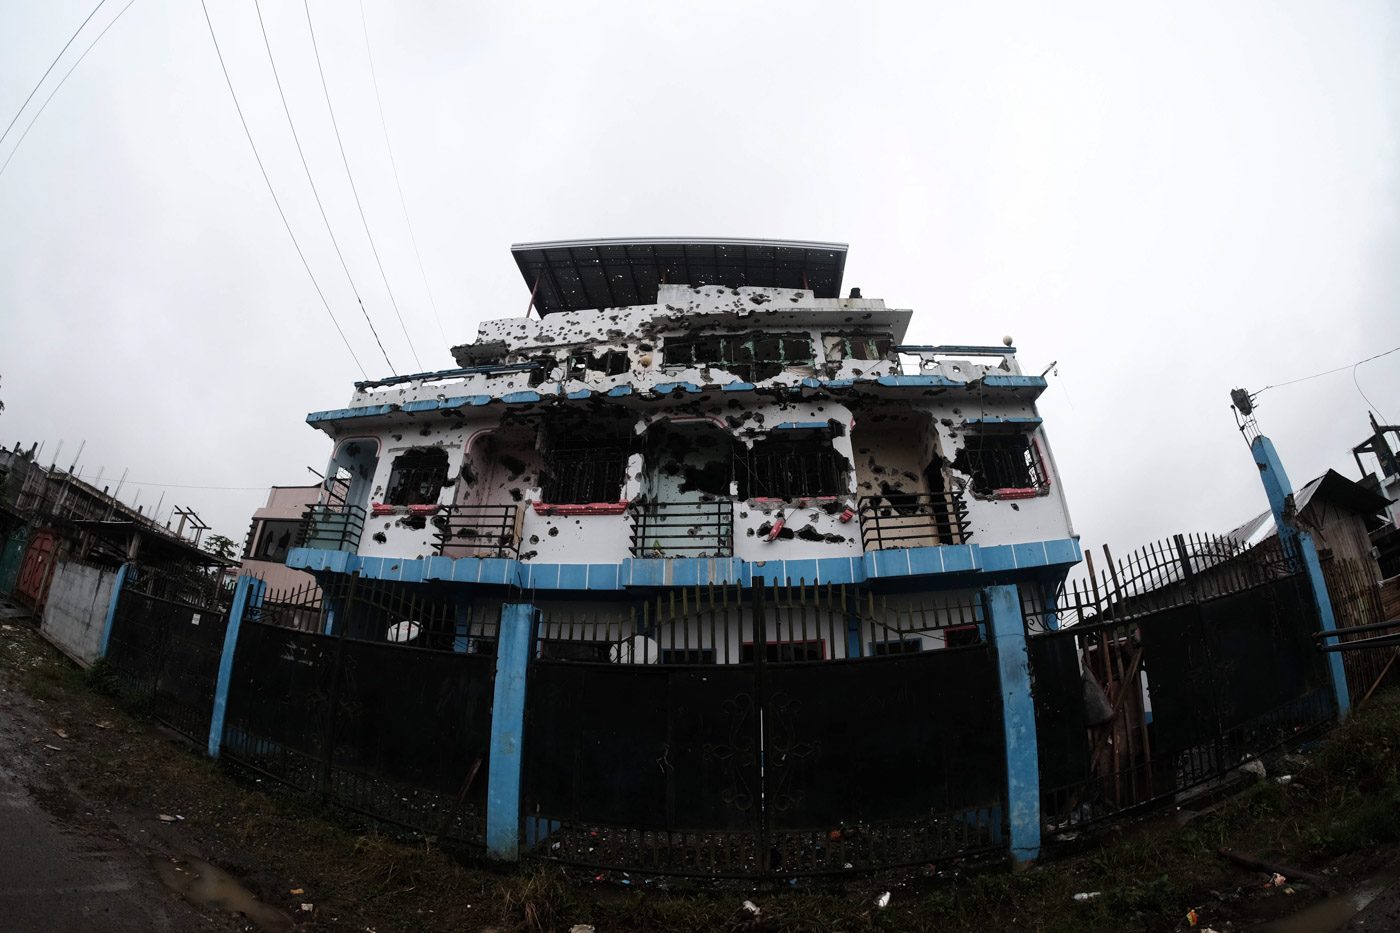 Battle-scarred: Marawi structures that remind us of the war